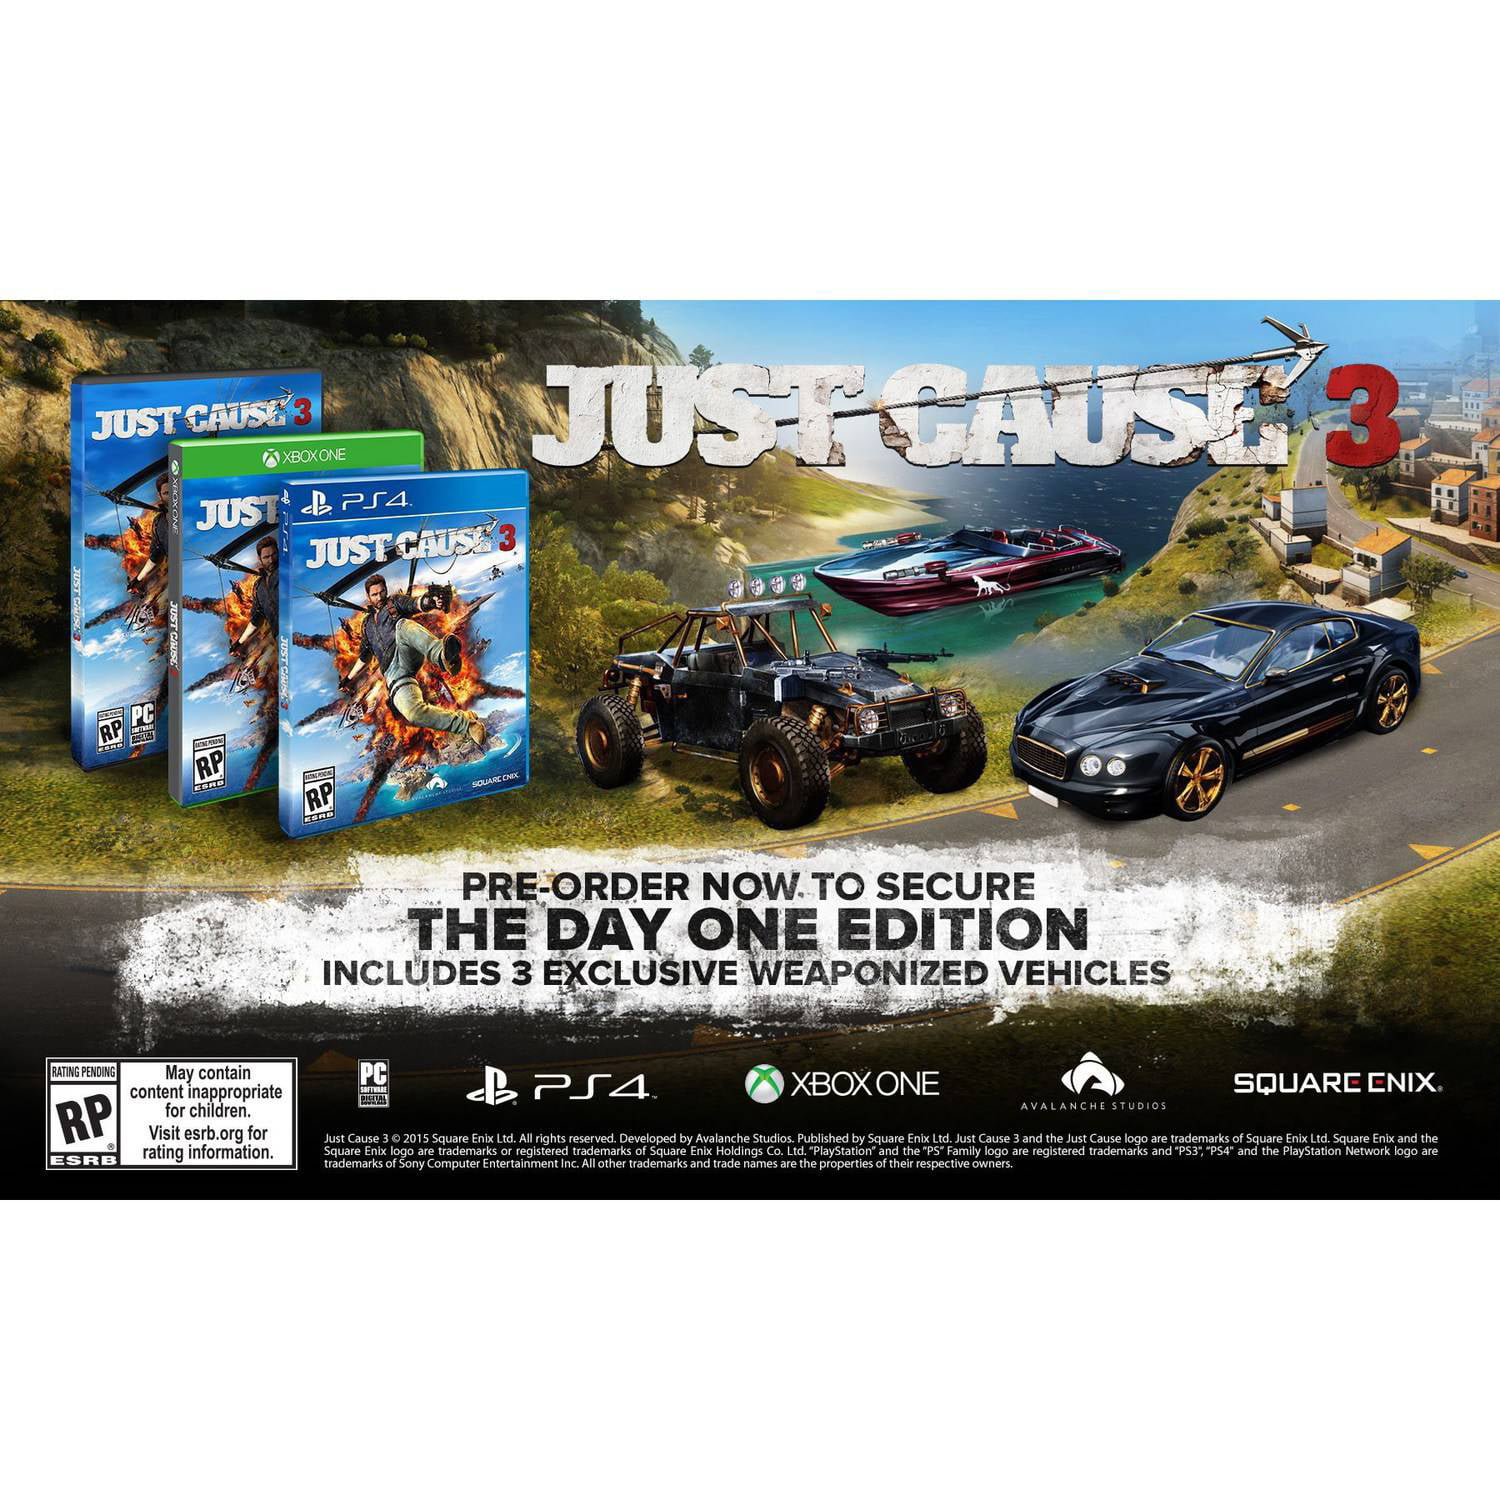 Konsekvent Ung dame favorit Just Cause 3, Square Enix, Xbox One, [Physical], 662248915913 - Walmart.com